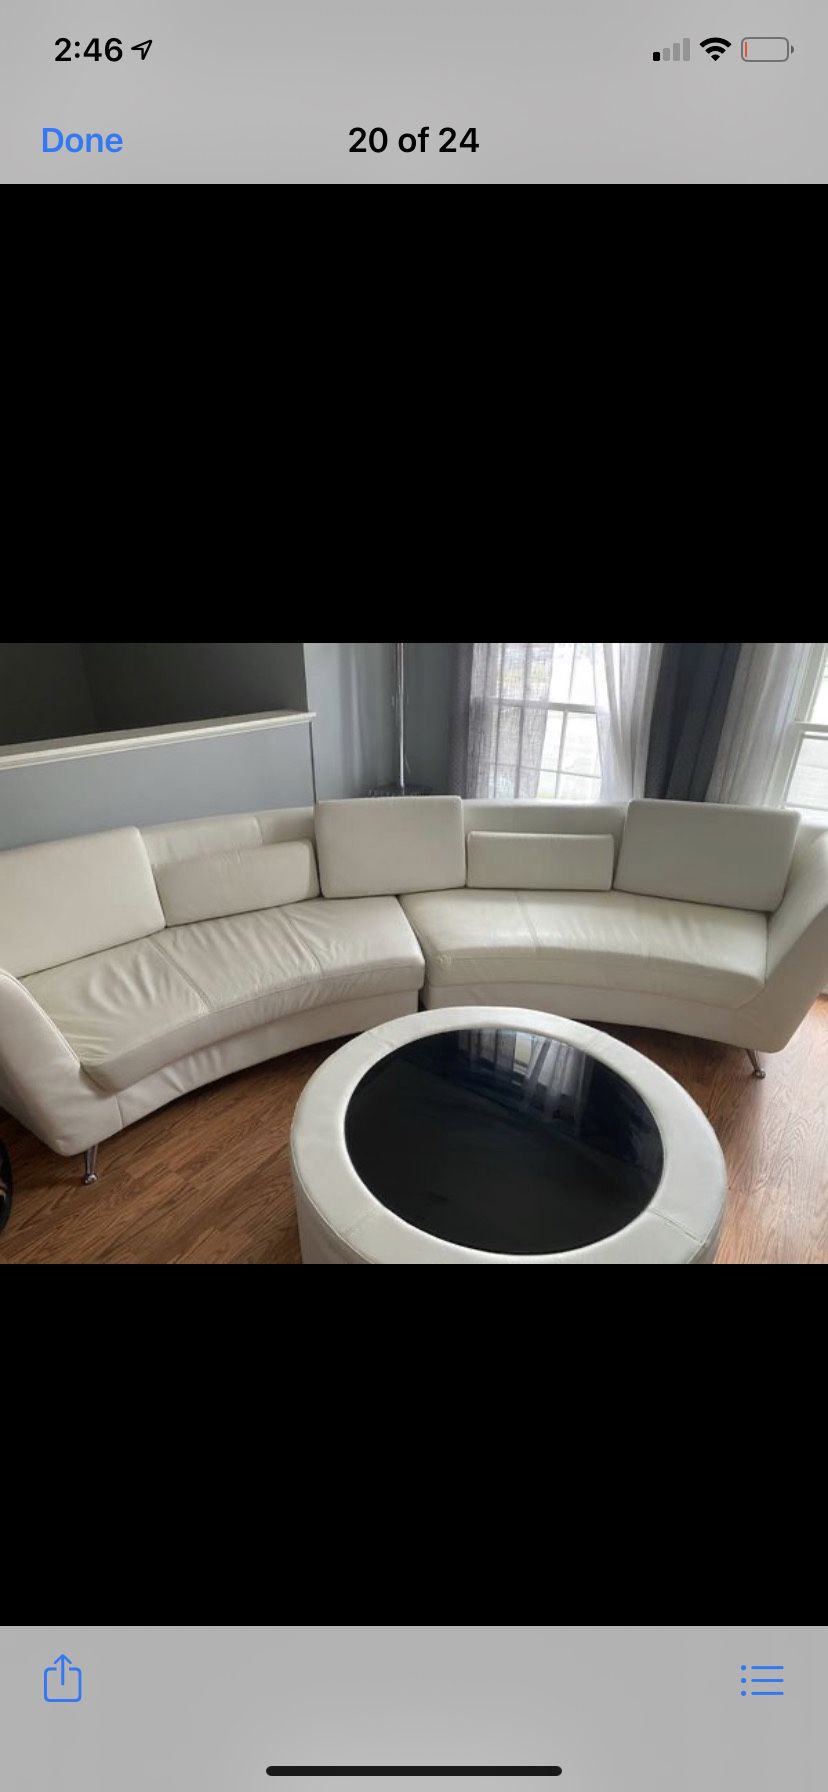 White leather sectional matching coffee table and TV stand